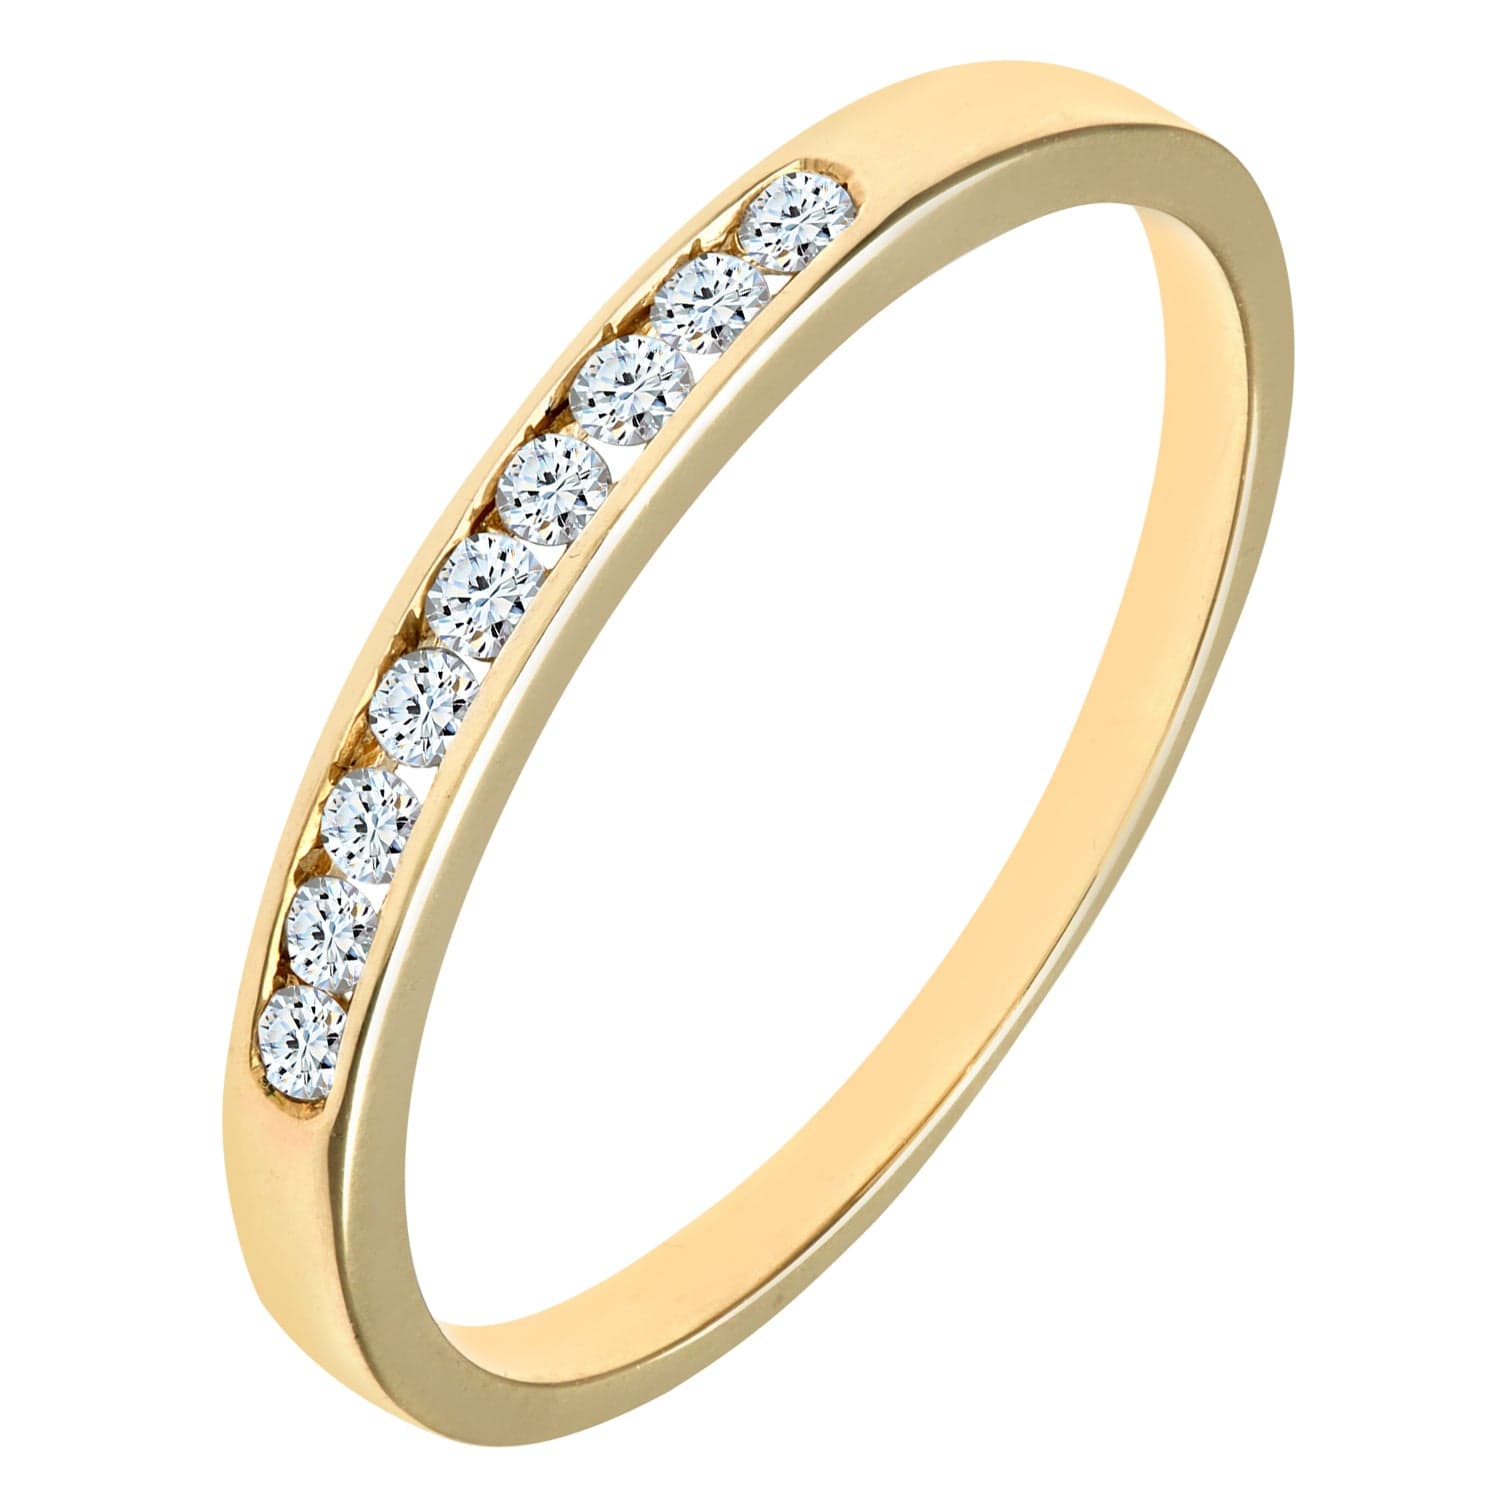 Lynora Luxe Ring White Gold 9ct / Diamond 9ct Yellow Gold Channel Set Diamond Eternity Ring